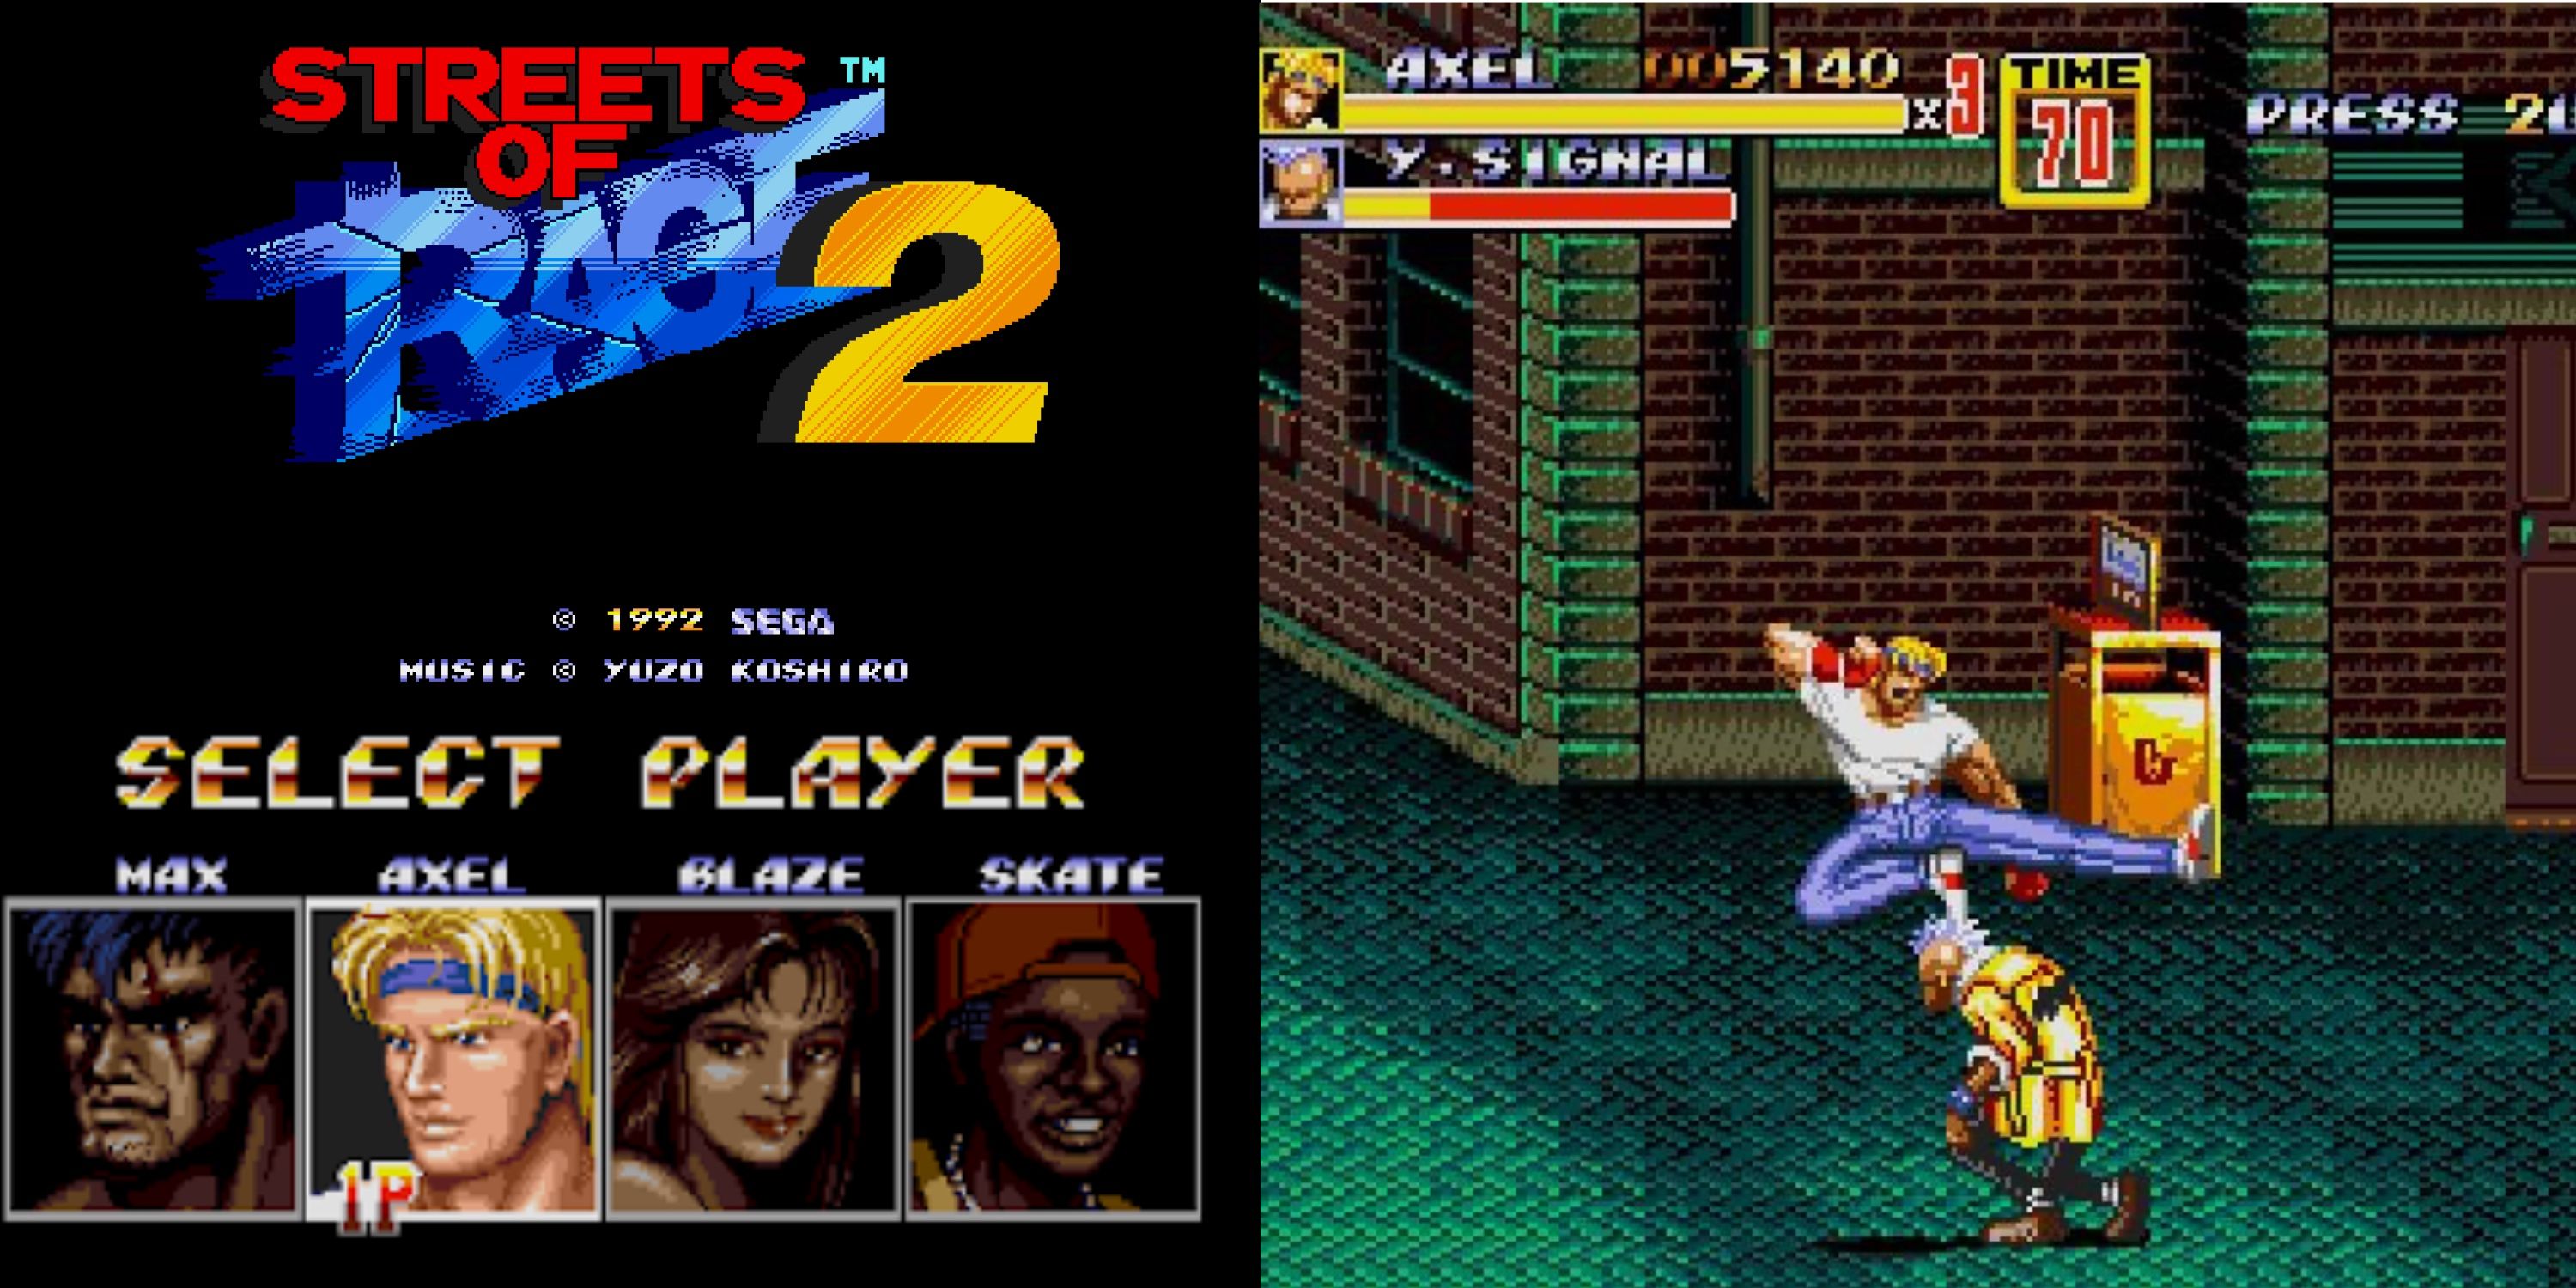 aStreets of rage 2 title screen, screenshot and player select screen